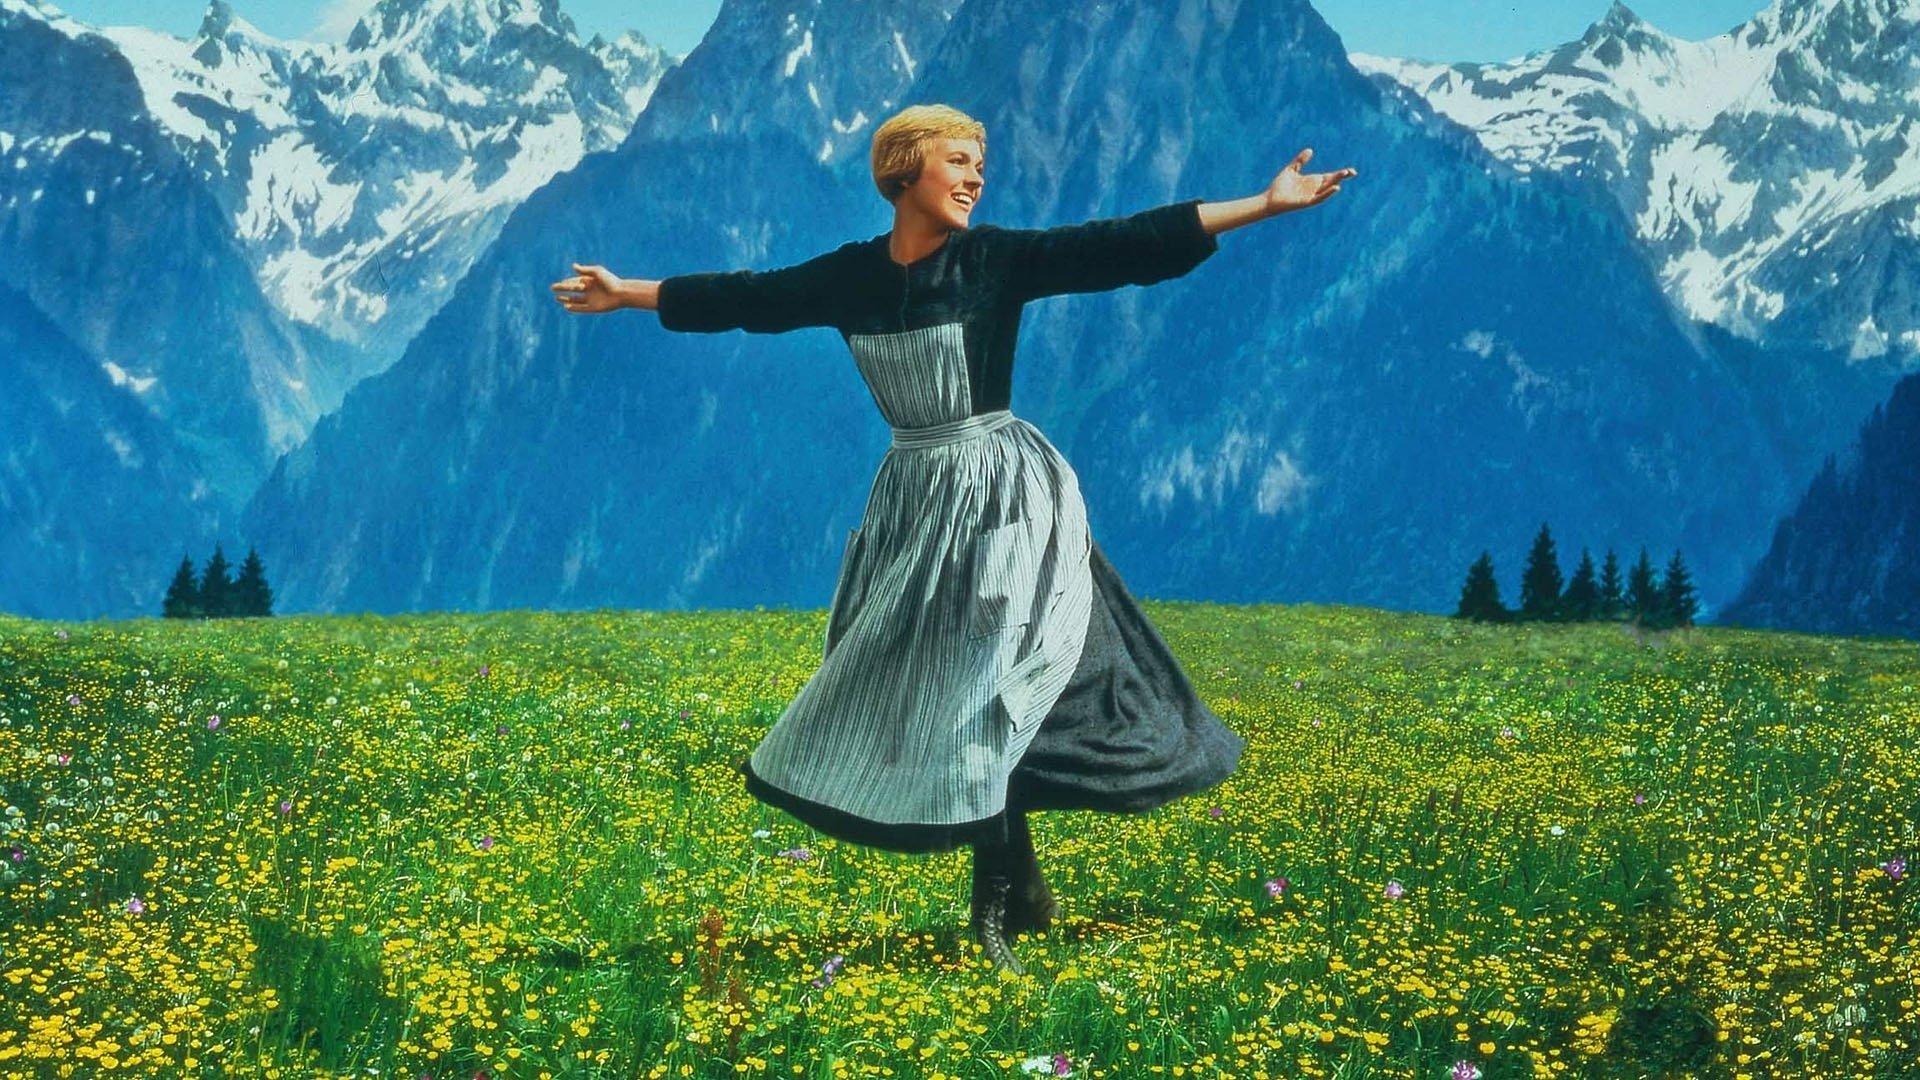 The Sound Of Music 2K Wallpapers